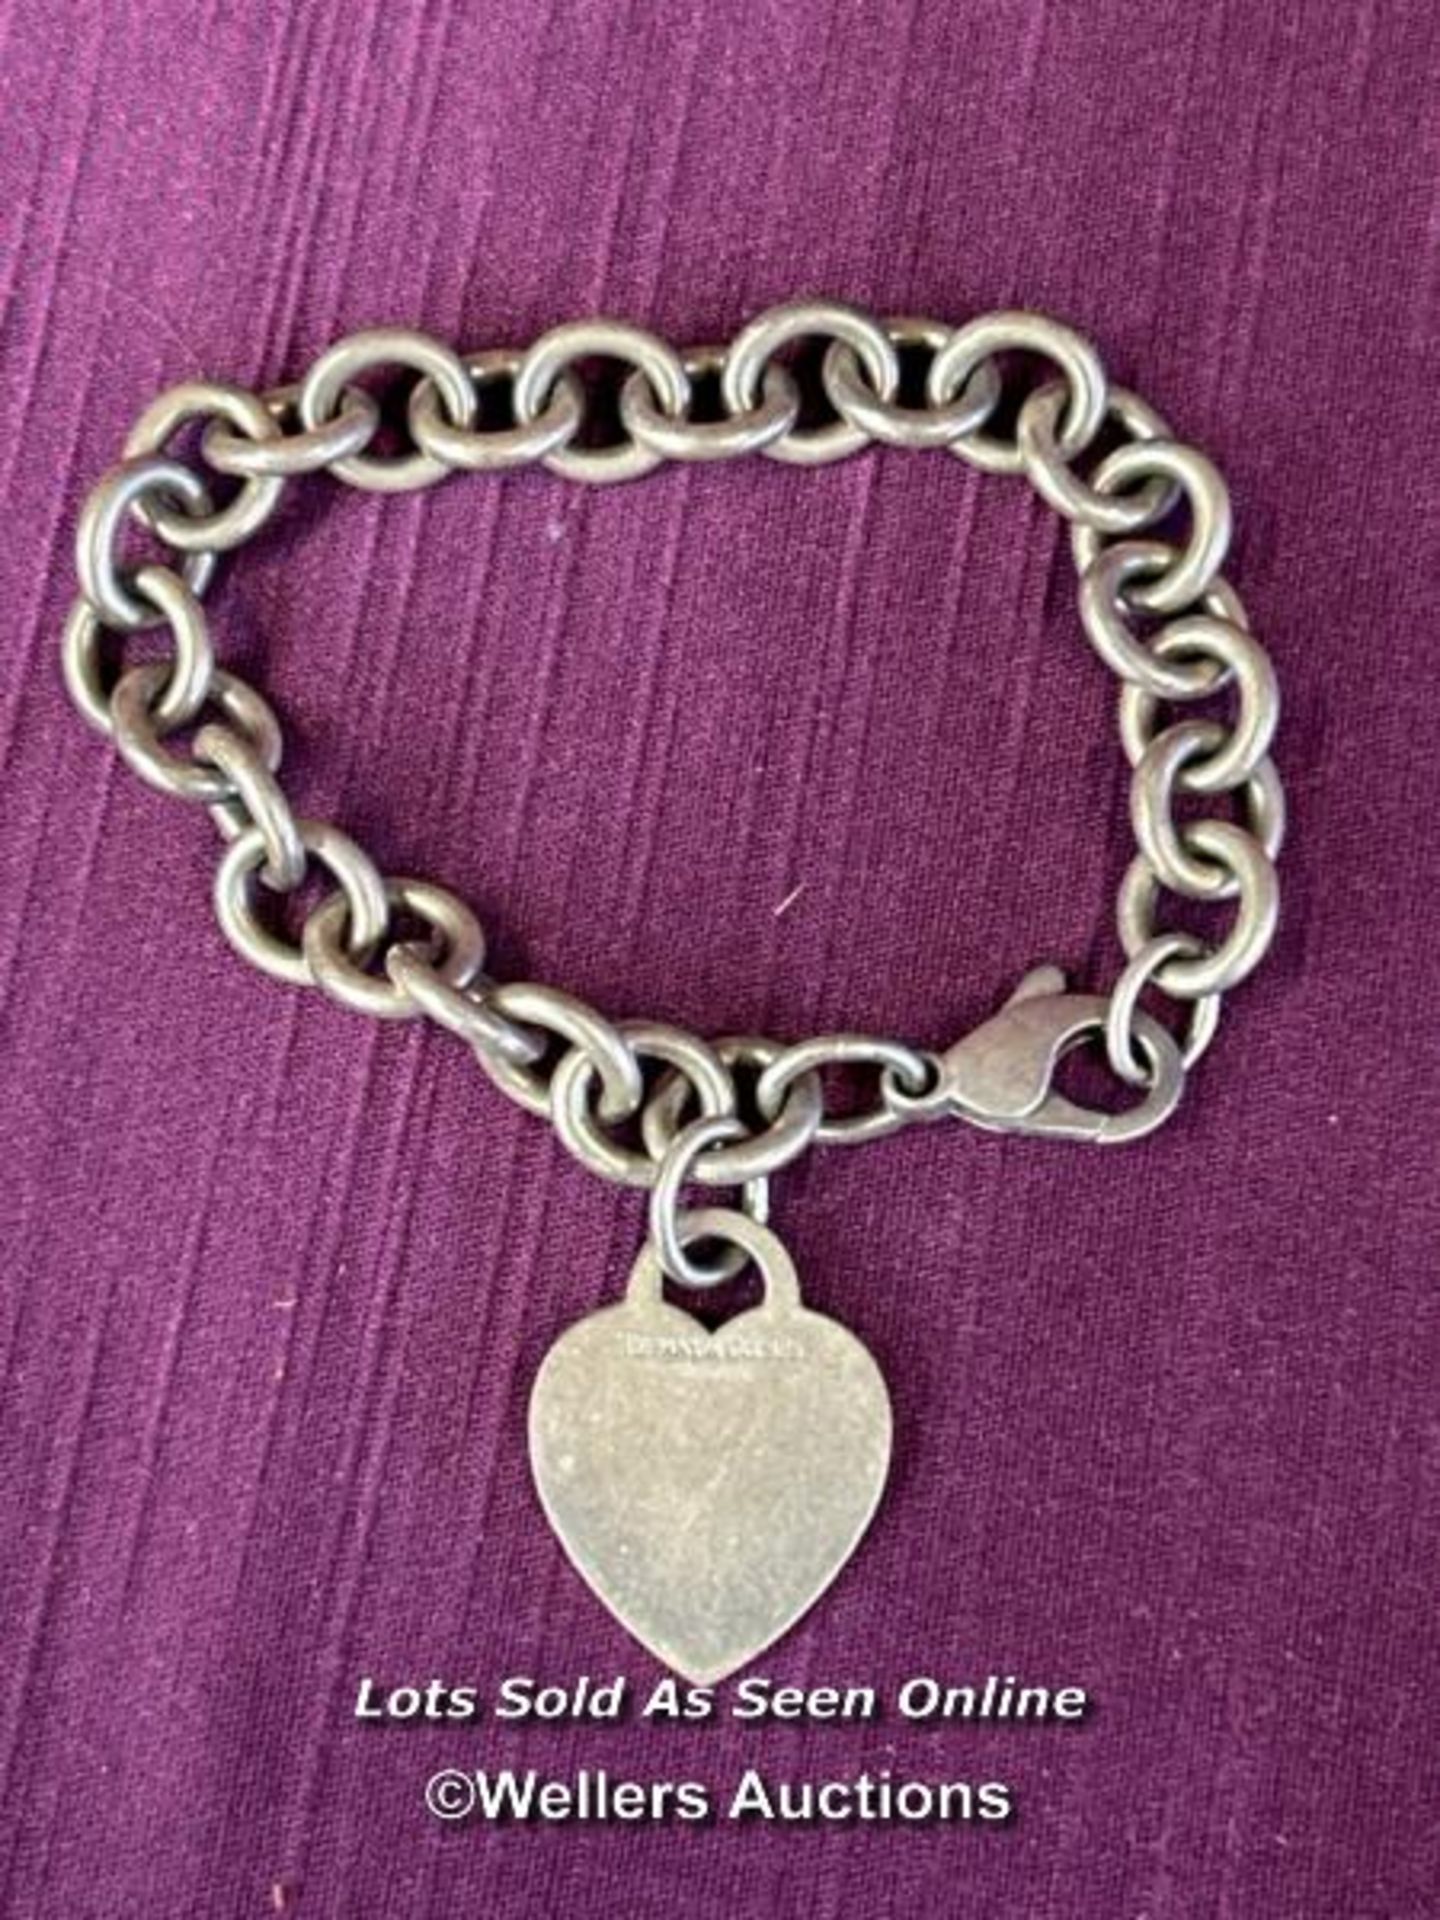 TIFFANY & CO. LINKED CHAIN BRACELET WITH HEART CHARM, MARKED 925 SILVER, WEIGHT 34GMS